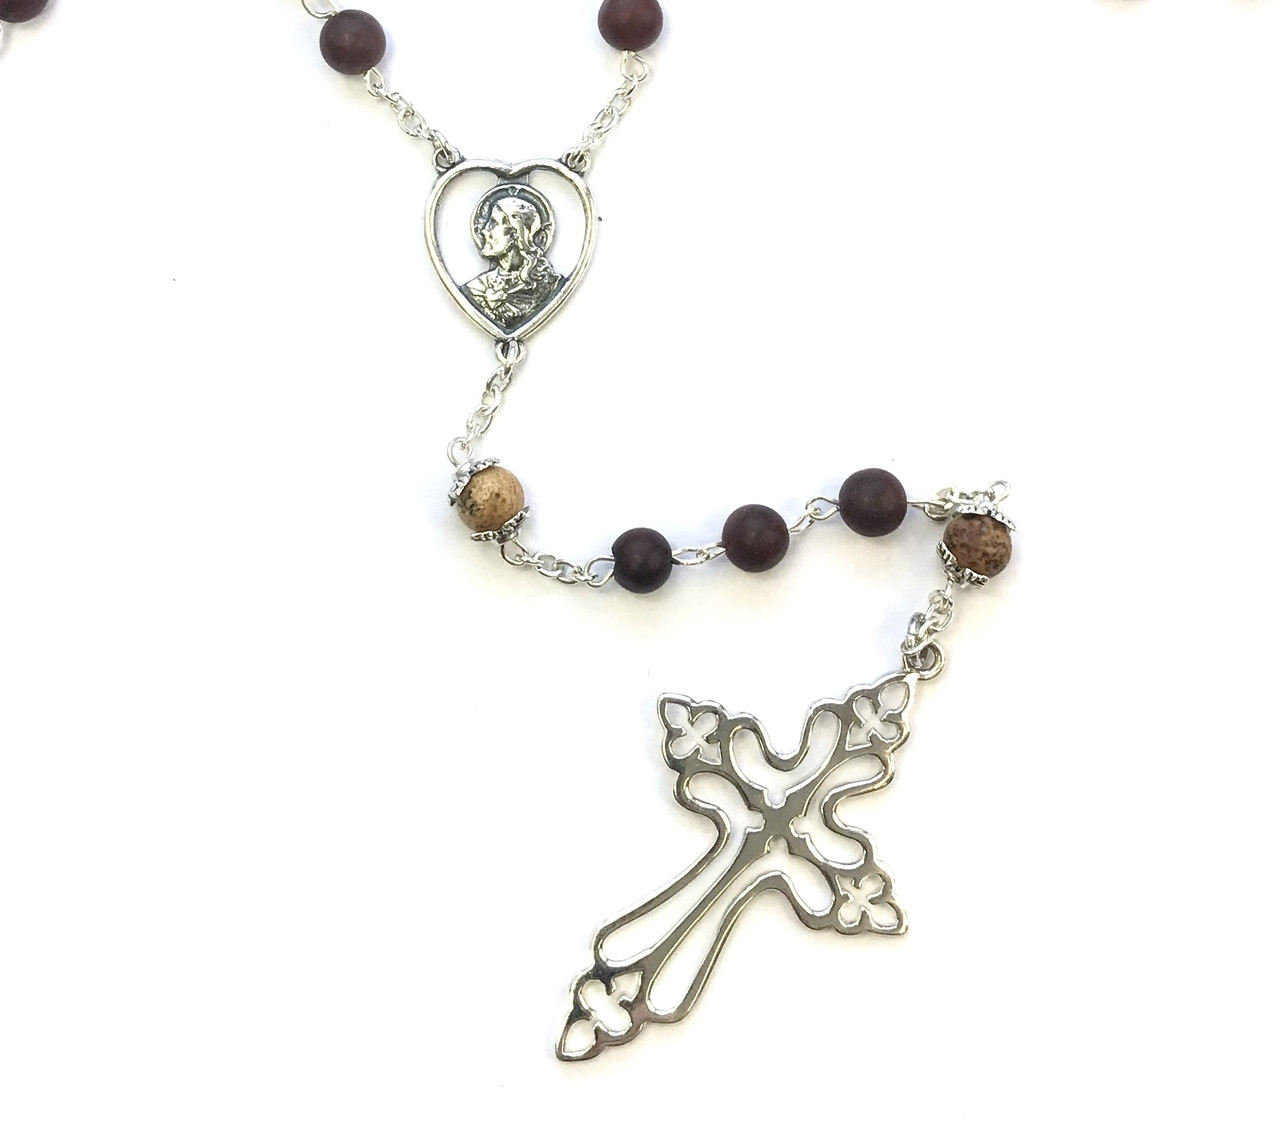 Amazon.com: Anglican Prayer Beads with Black Pearls with Ornate Cross,  Anglican Rosary, Pearl Prayer Beads, Custom Rosary : Arts, Crafts & Sewing